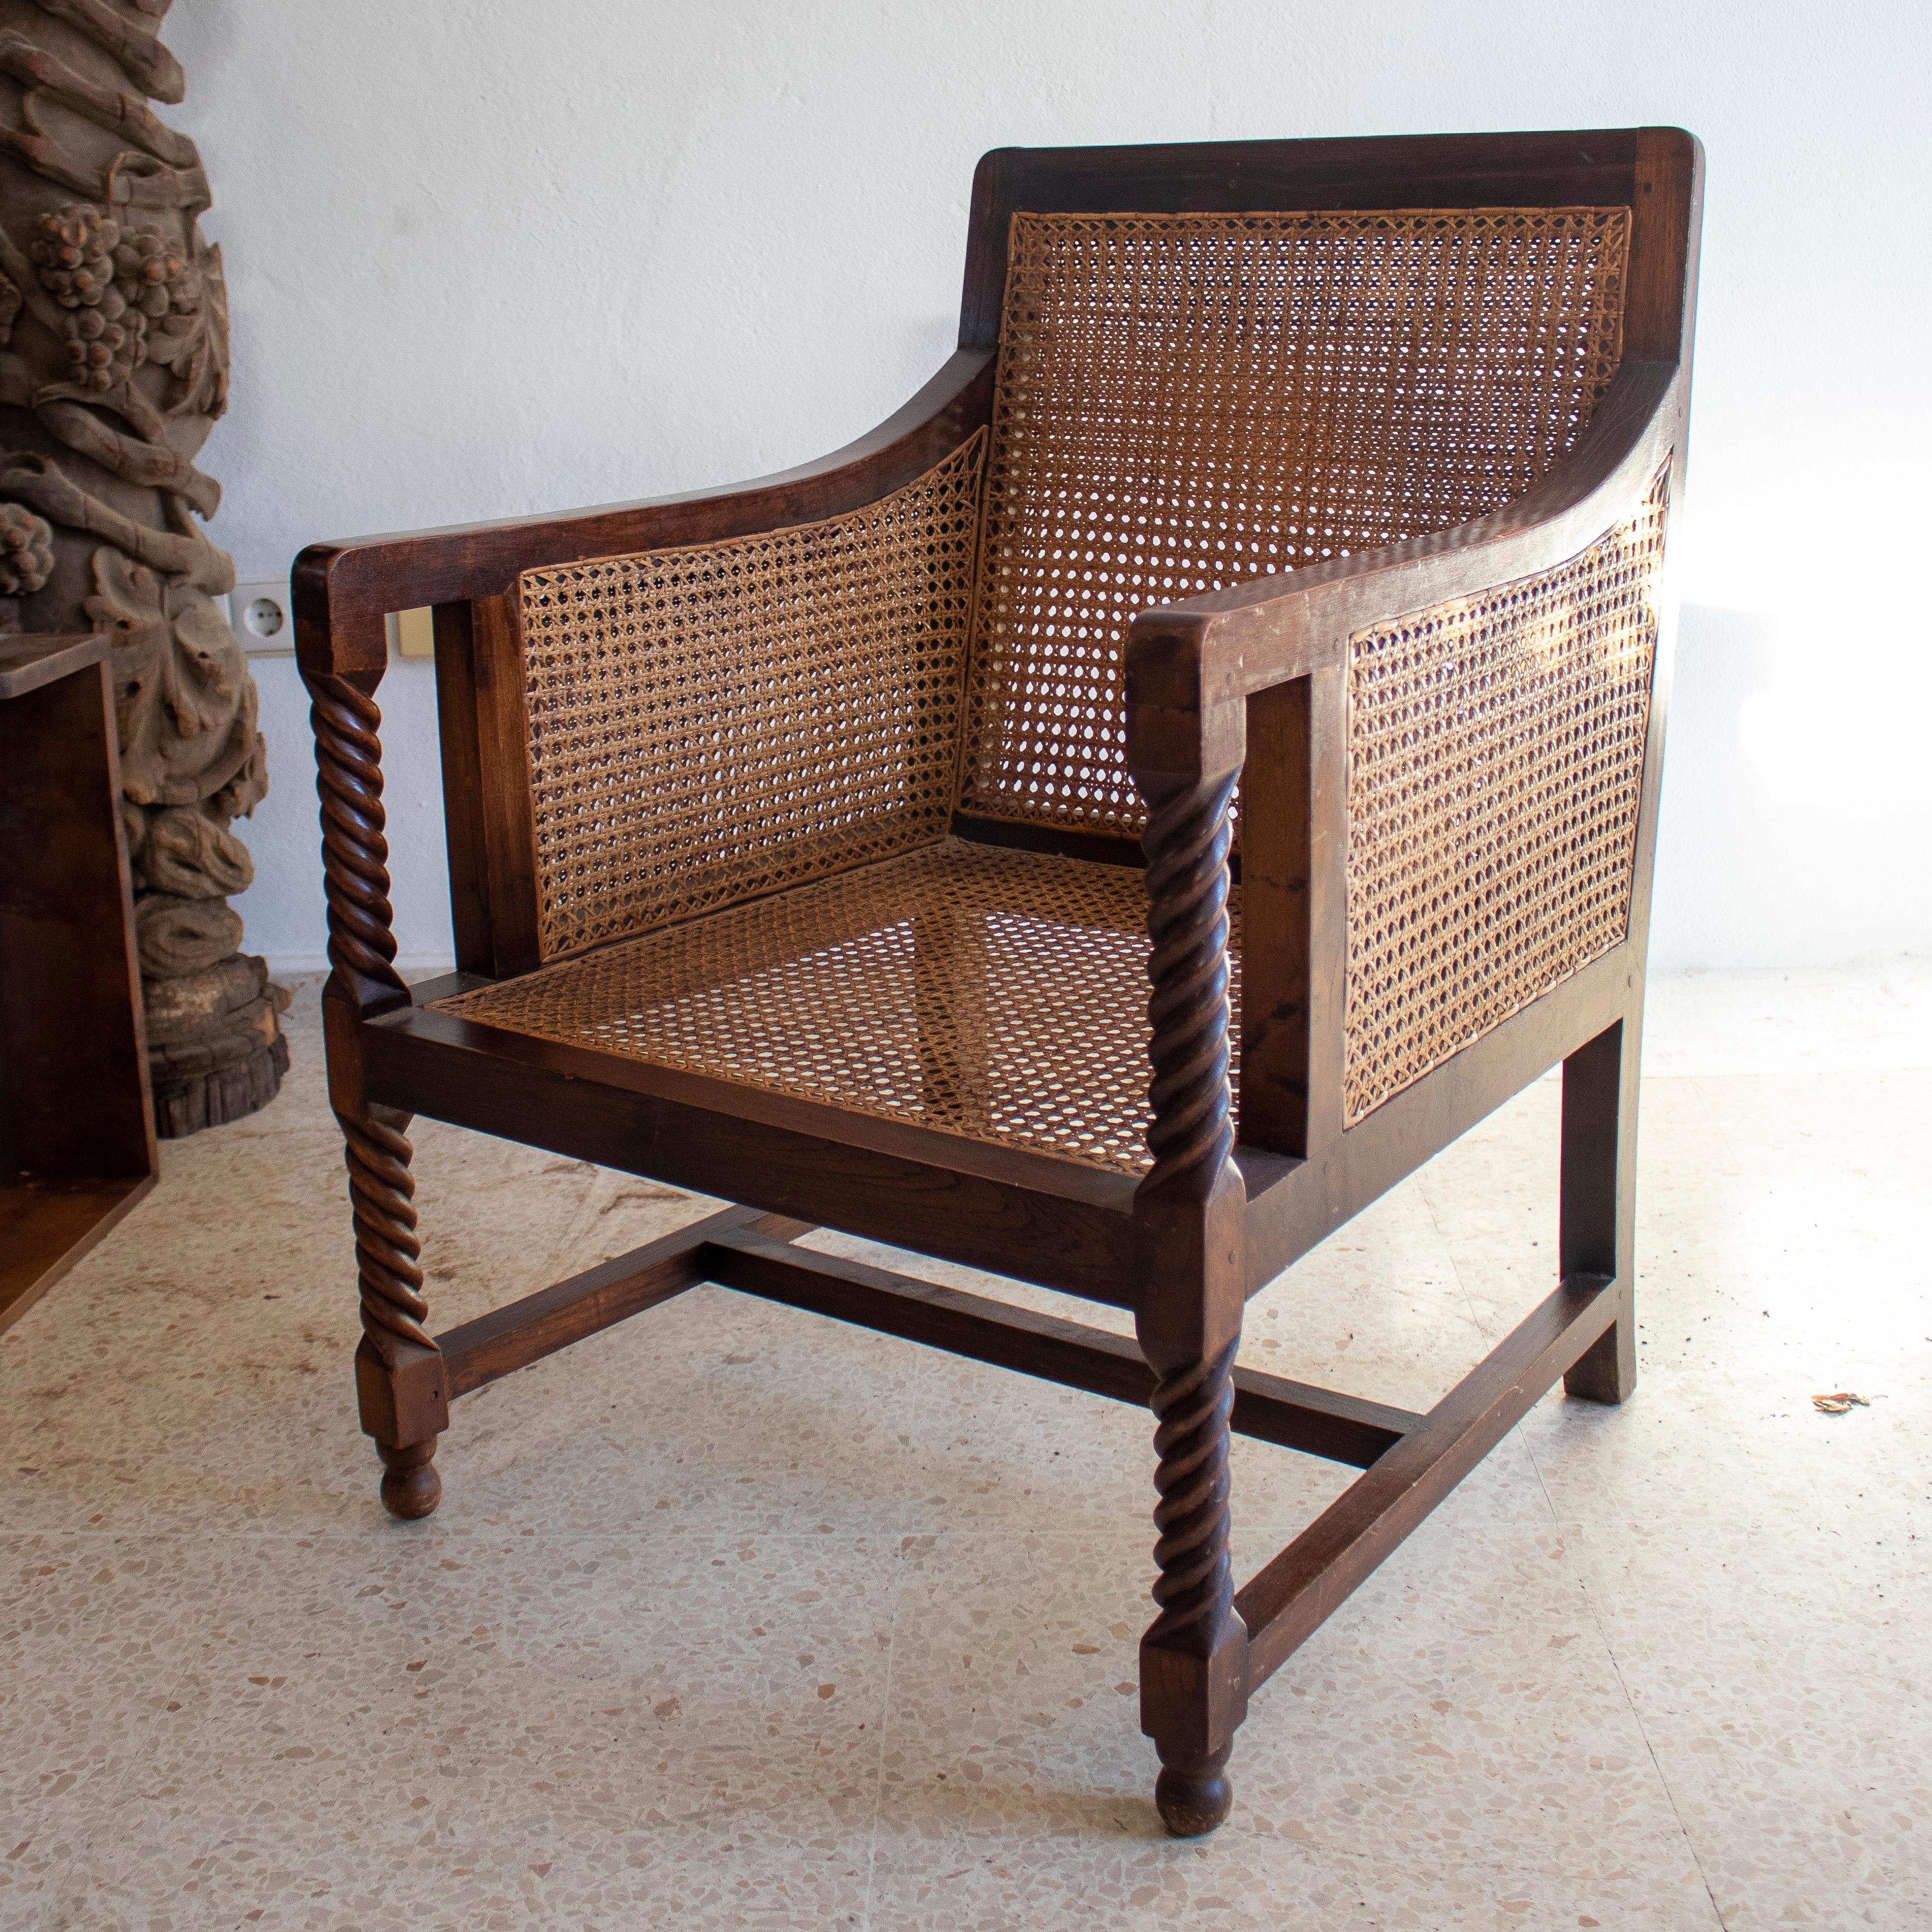 20th Century Pair of 1970s Spanish Wood & Woven Cane Sofa Chairs w/ Spindle Armrest Support